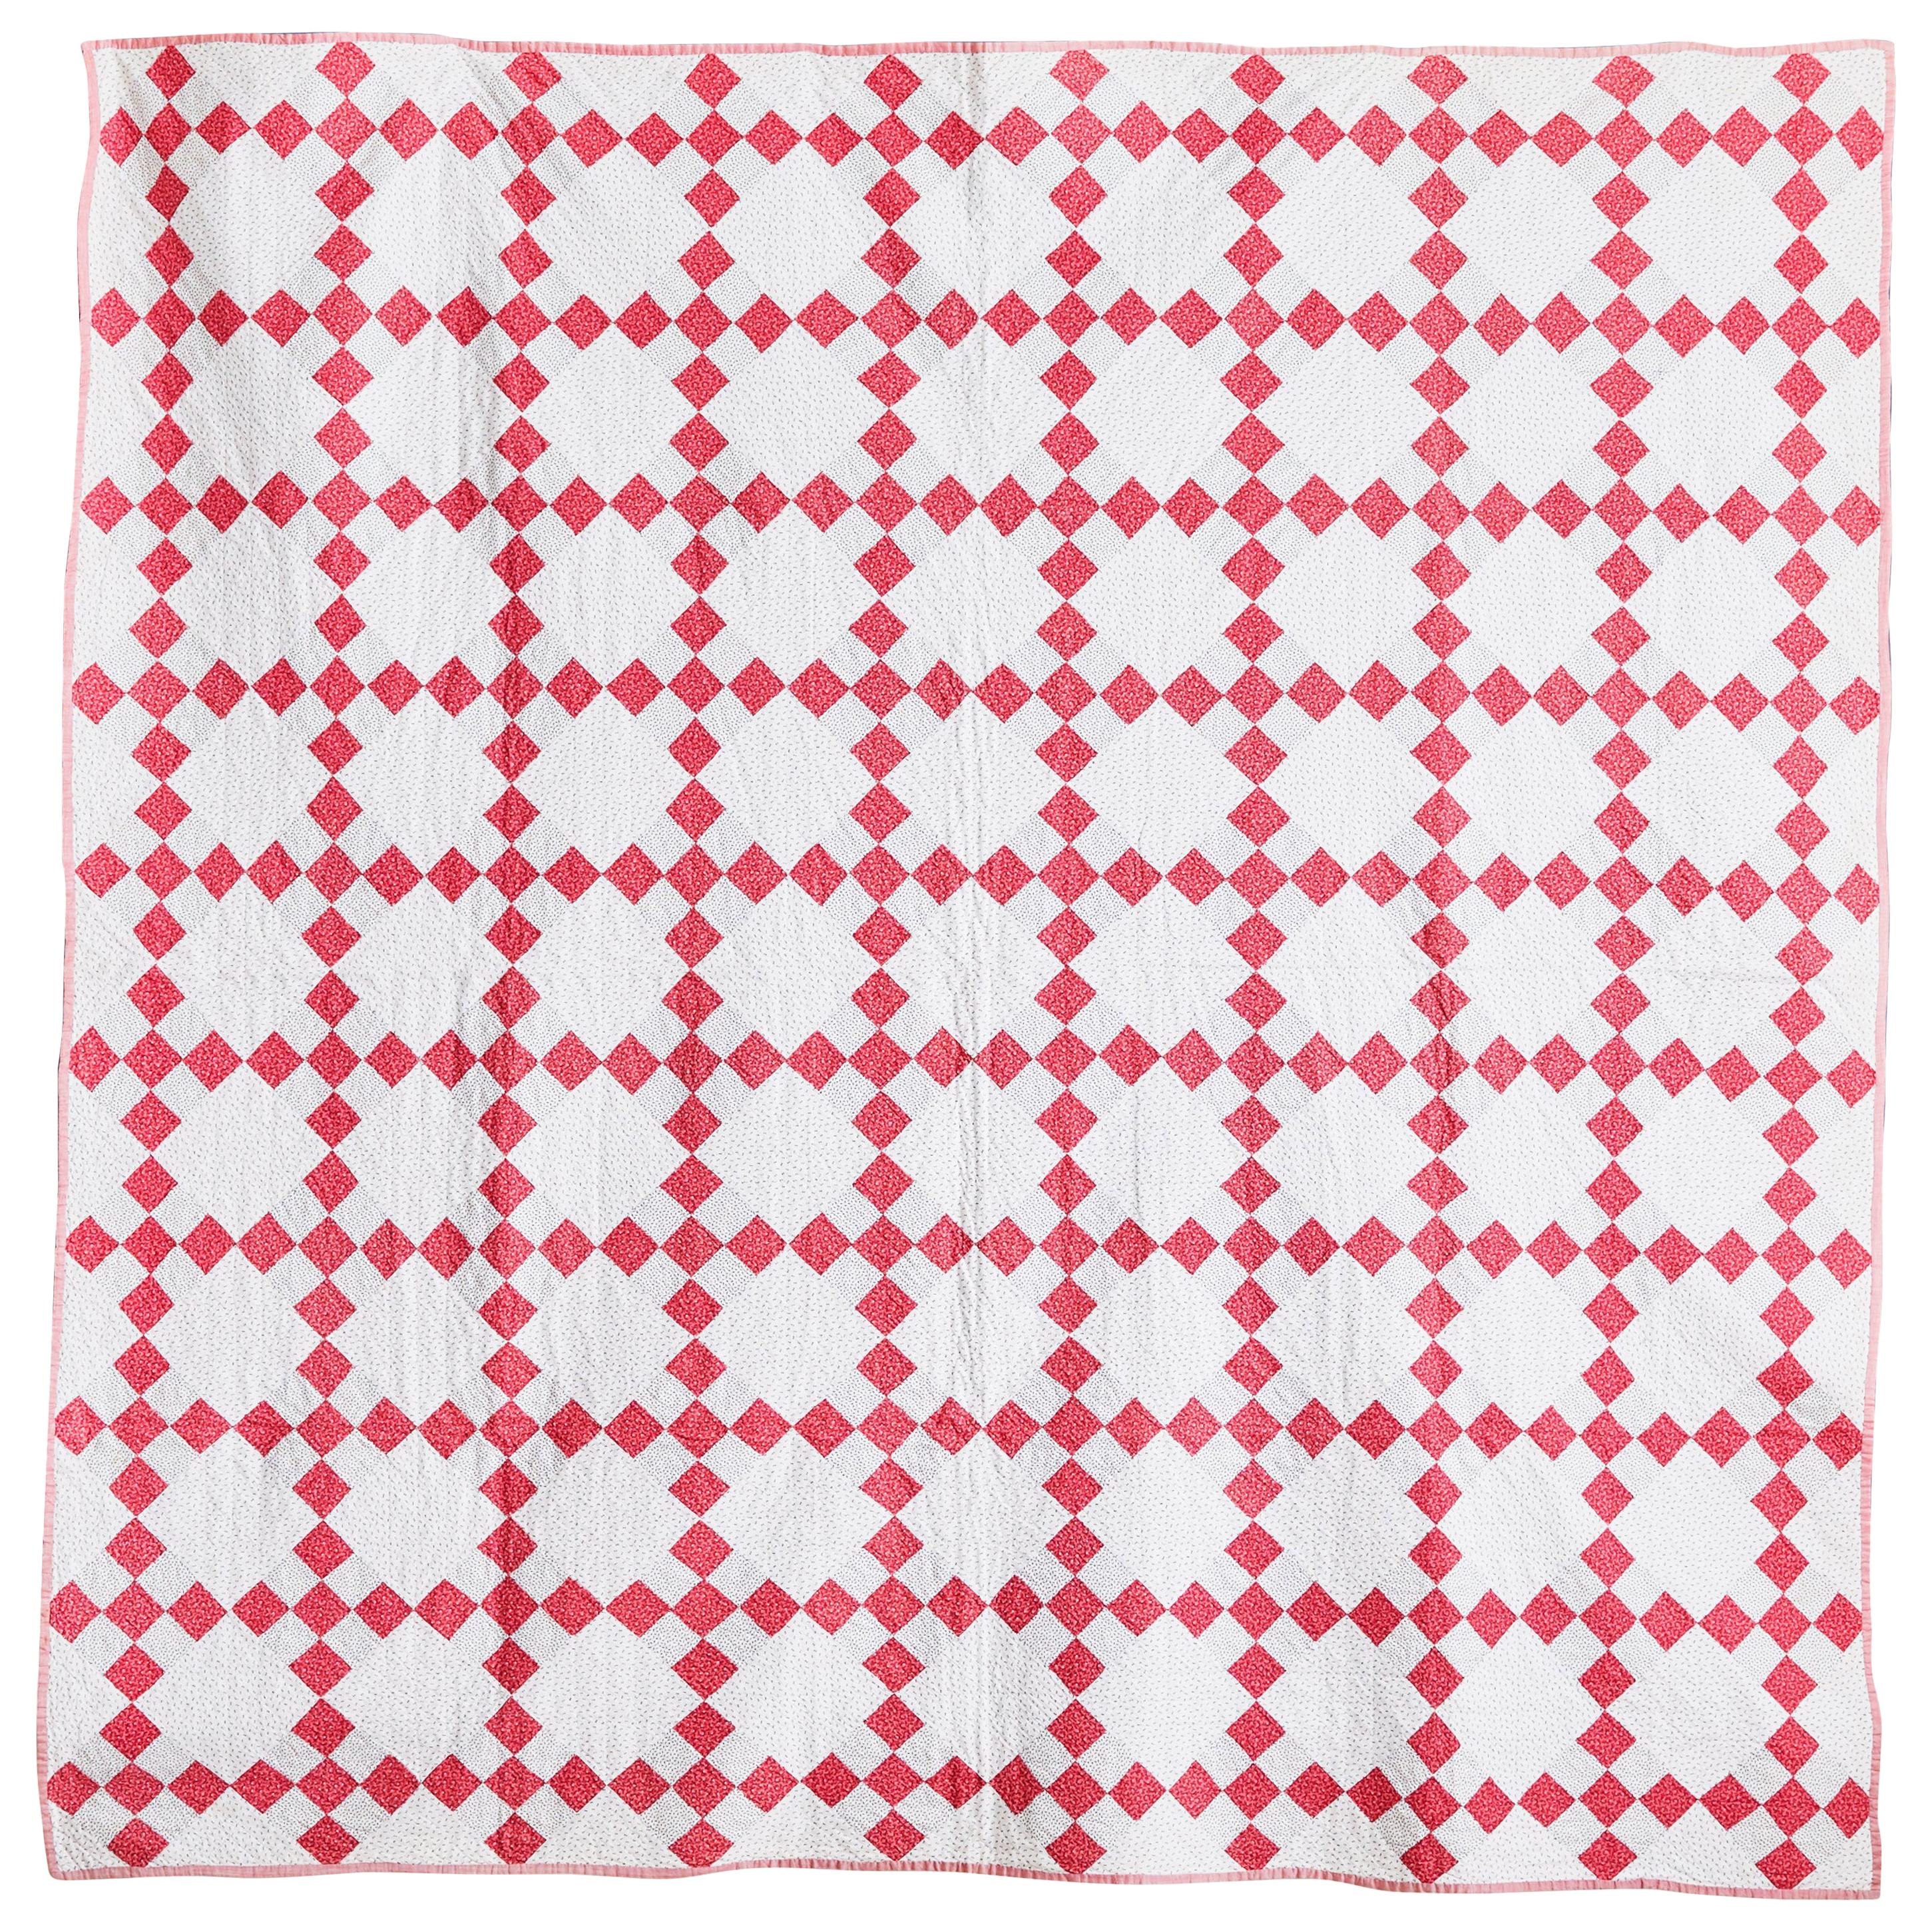 Vintage American 1930s "Nine Patch" Patchwork Quilt in White and Red Patterns